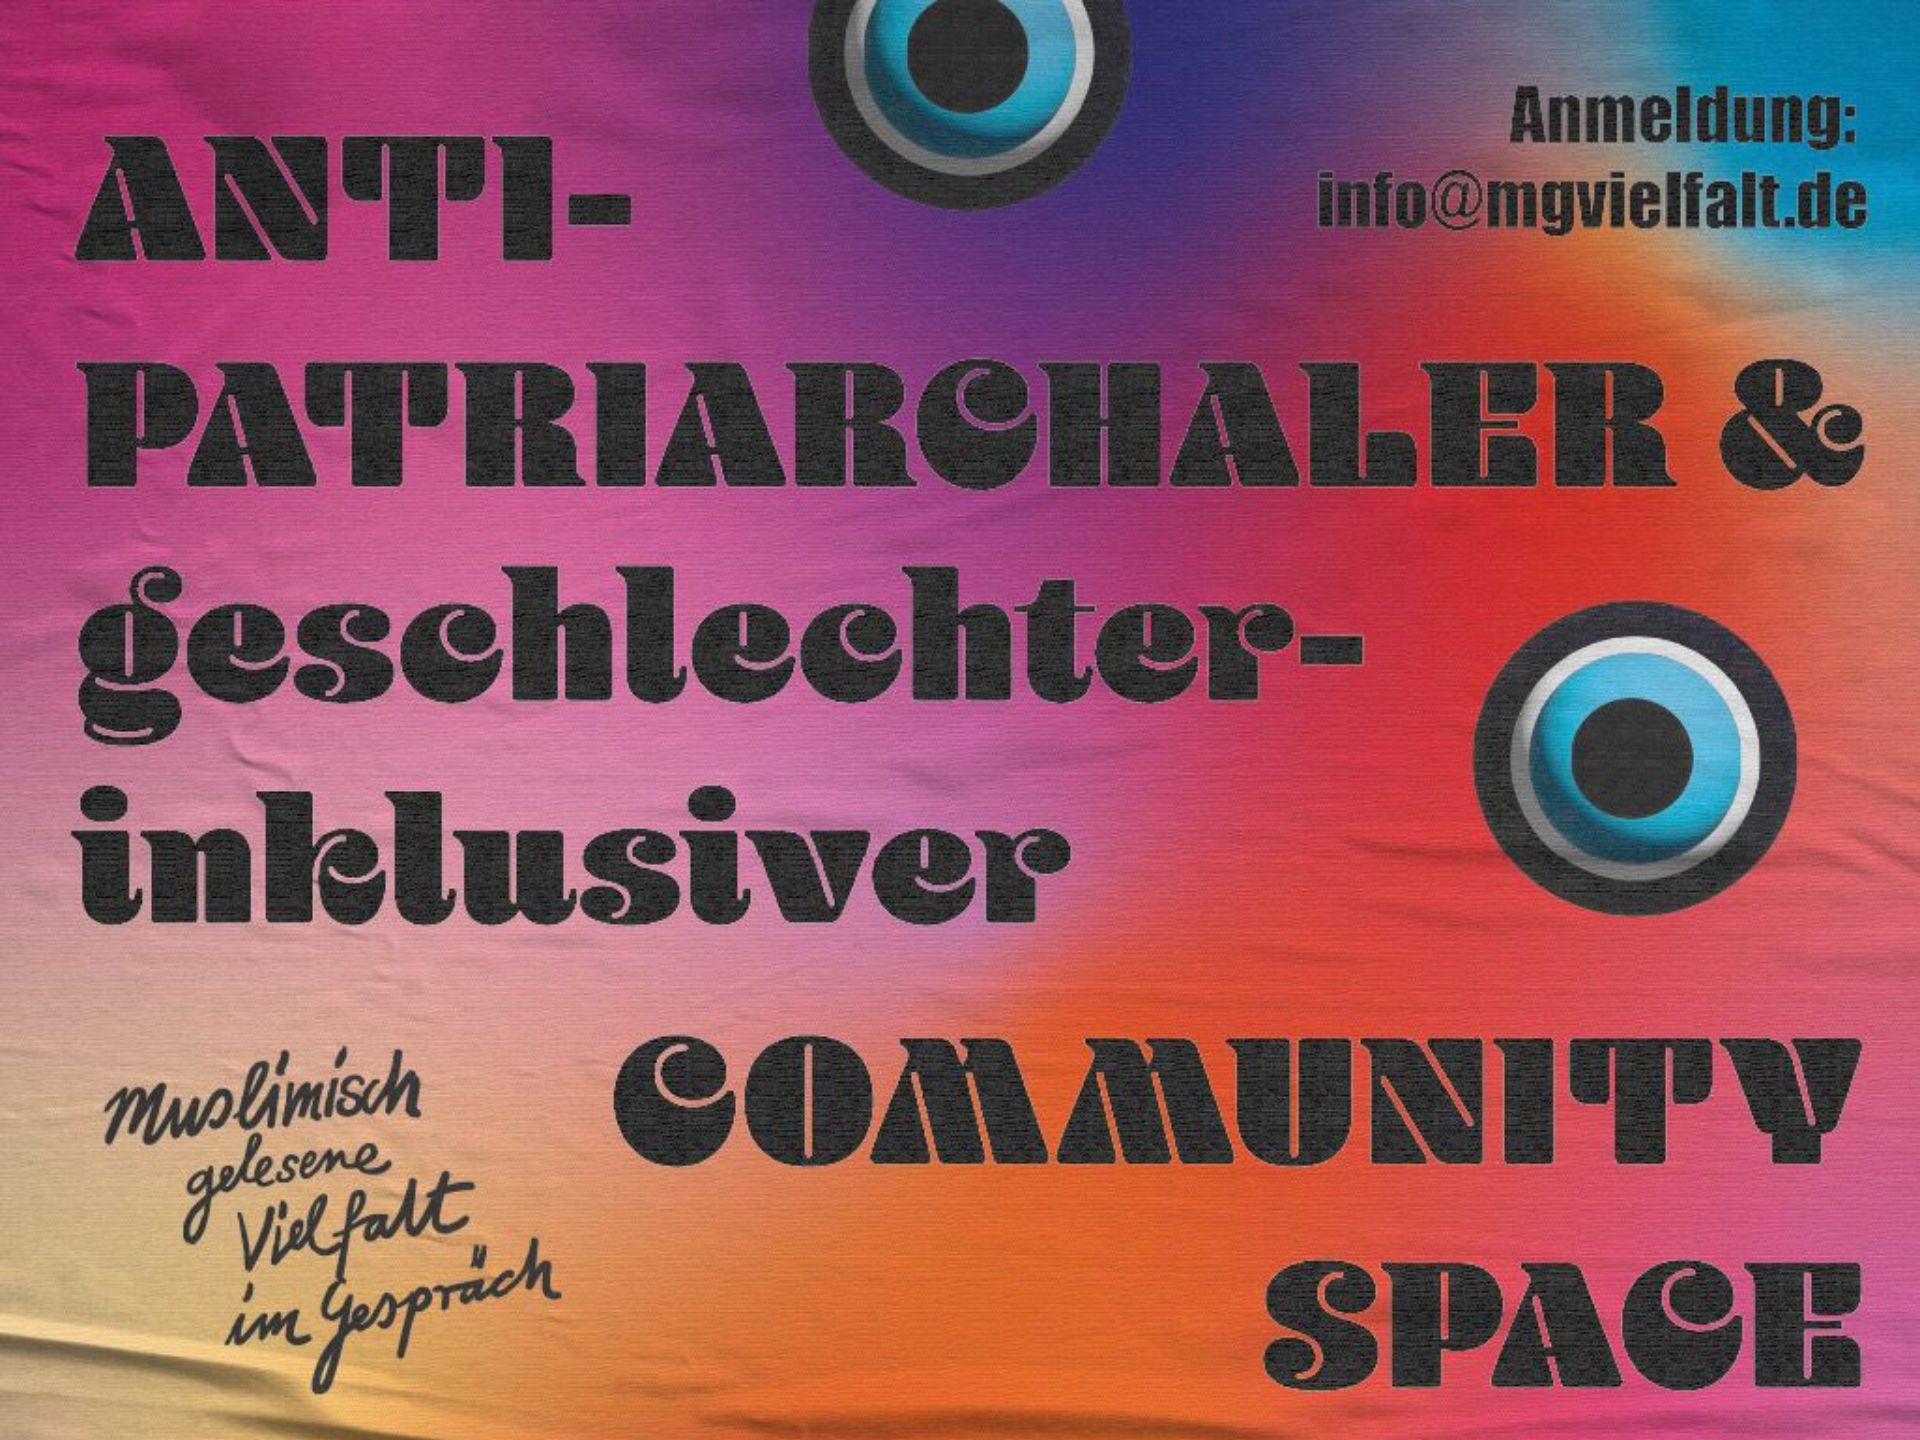 Workshops + talks | Anti-patriarchal and gender-inclusive community space